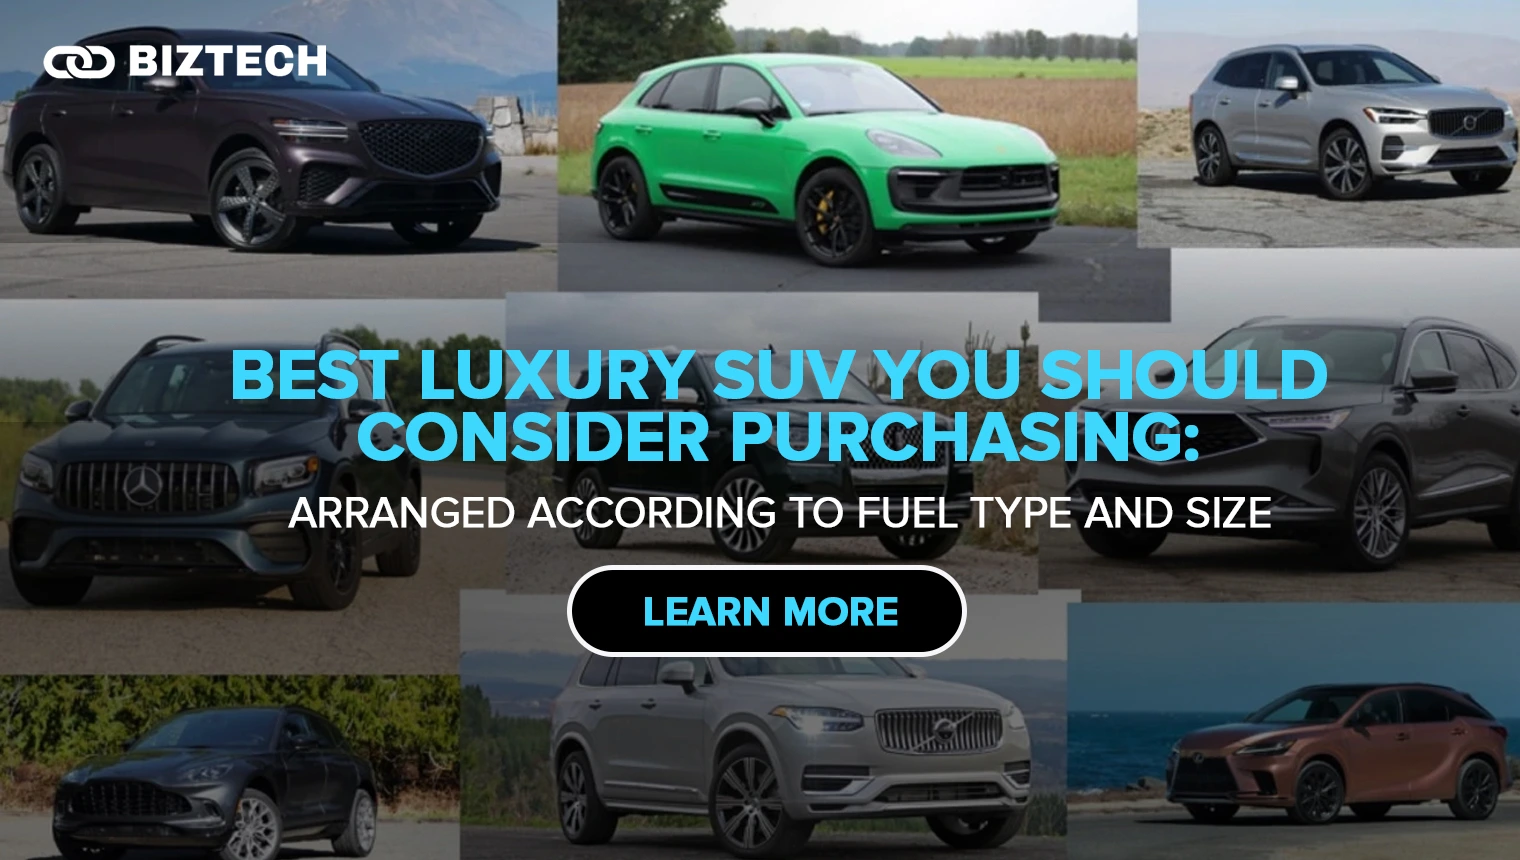 Best Luxury SUV You Should Consider Purchasing Arranged According to Fuel Type and Size